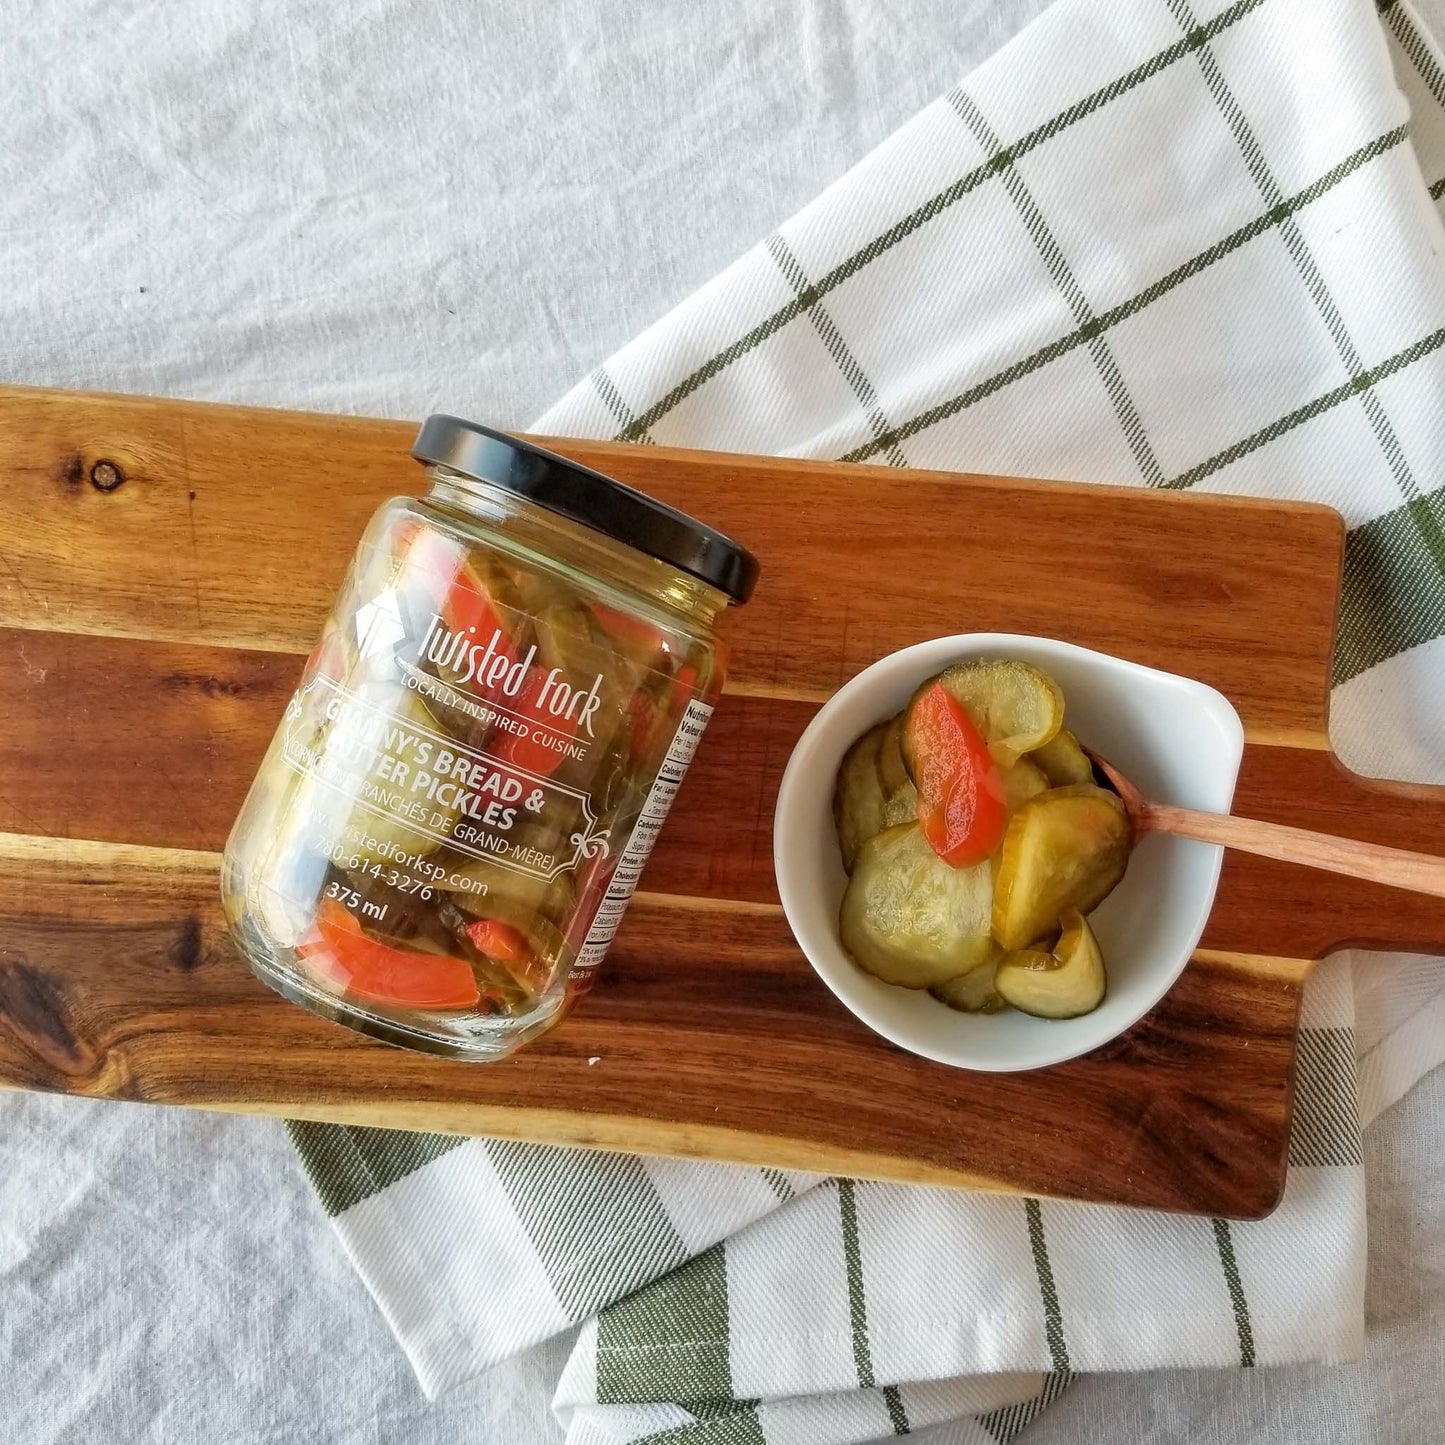 Granny's bread and butter pickles